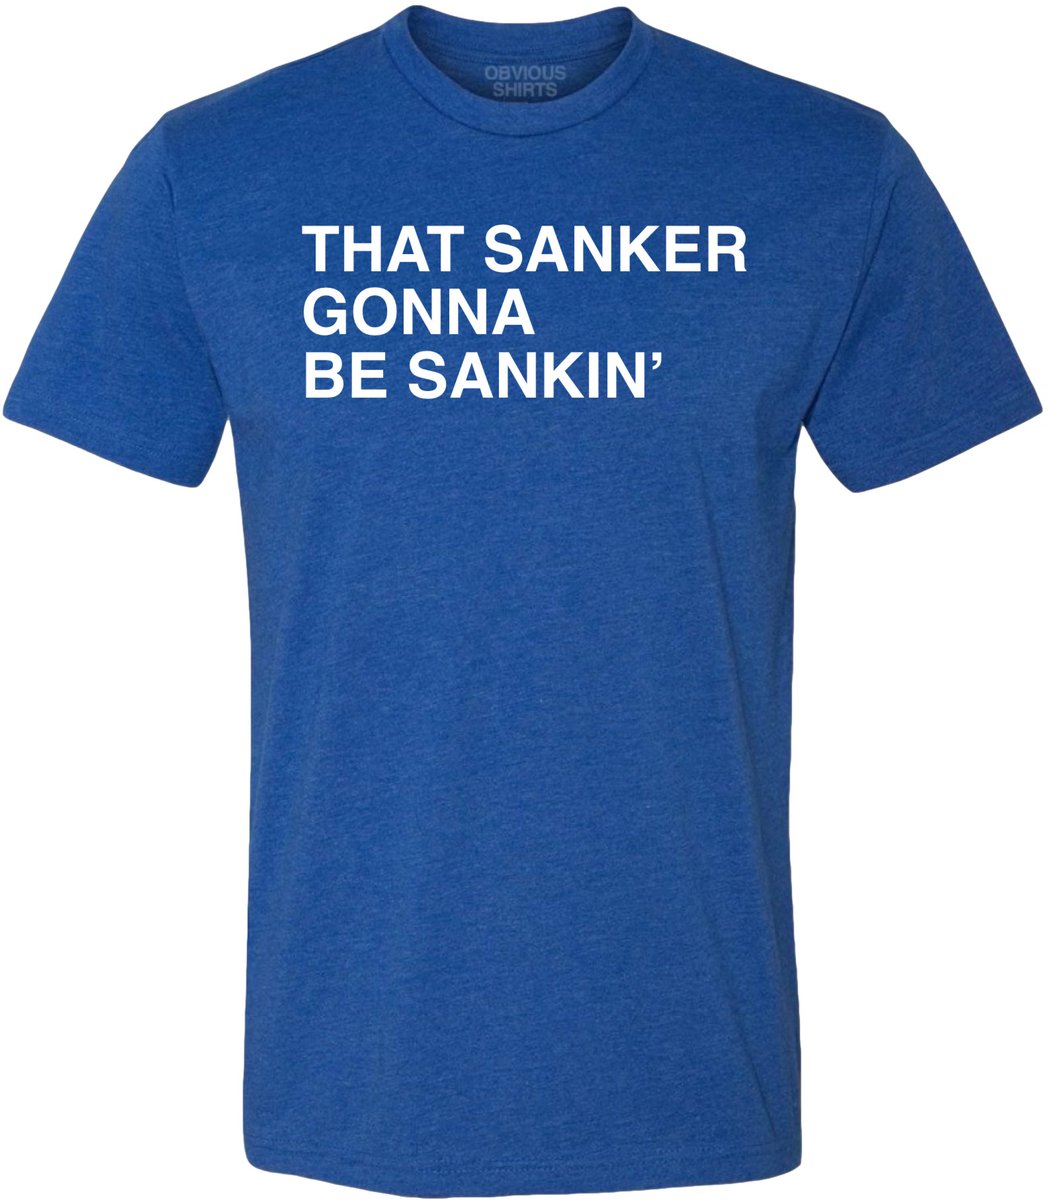 🔥THAT SANKER GONNA BE SANKIN’ 

Now available:  obviousshirts.com/products/that-…